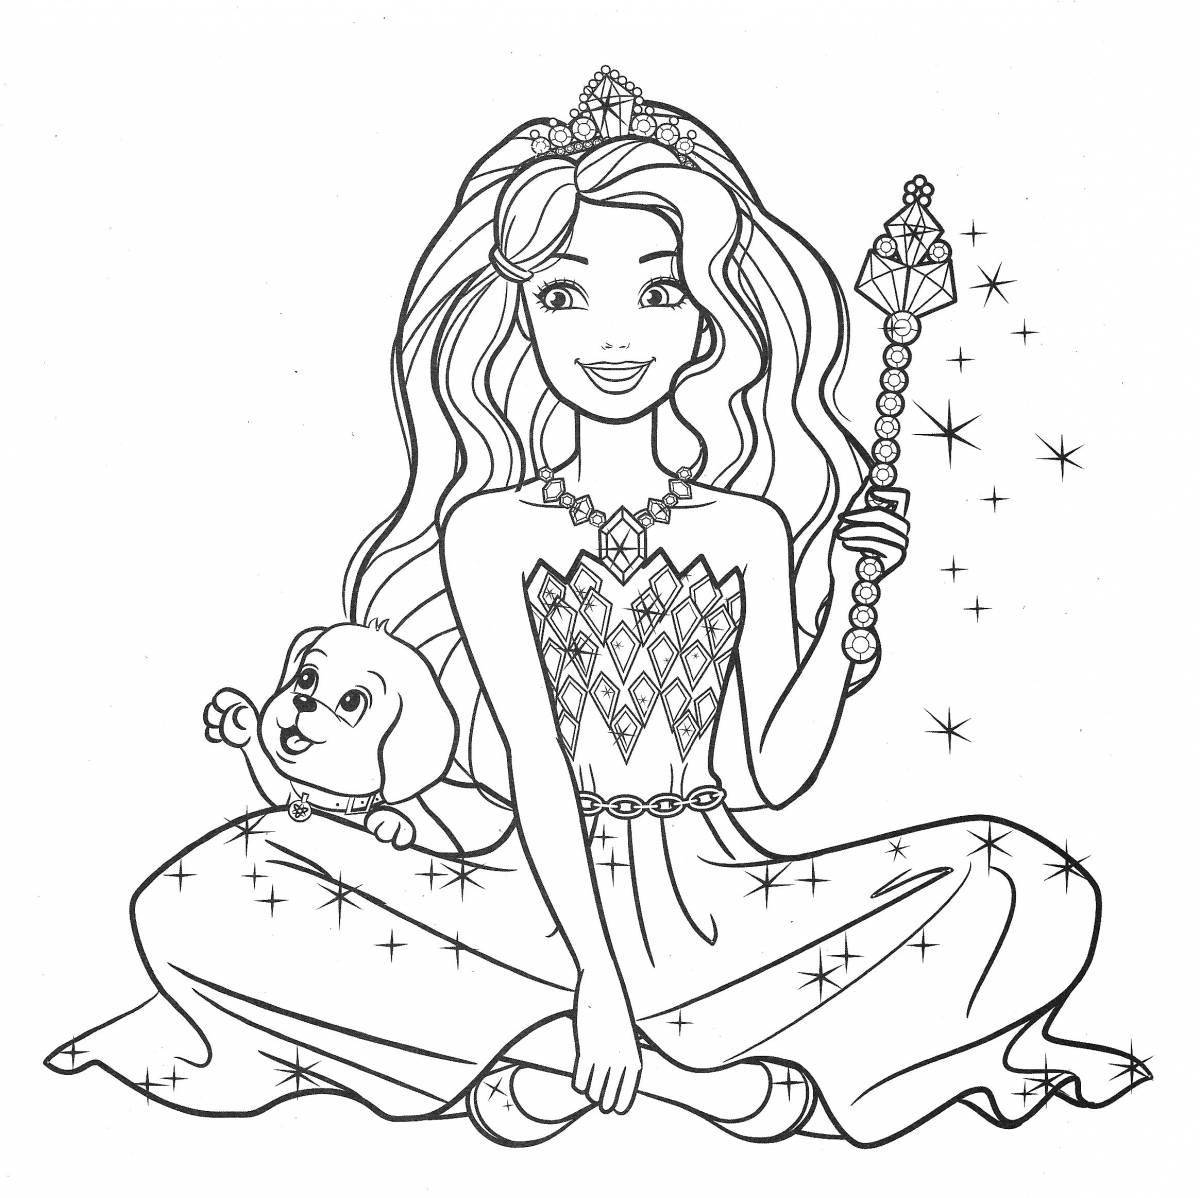 Adorable Barbie coloring book for kids 6-7 years old